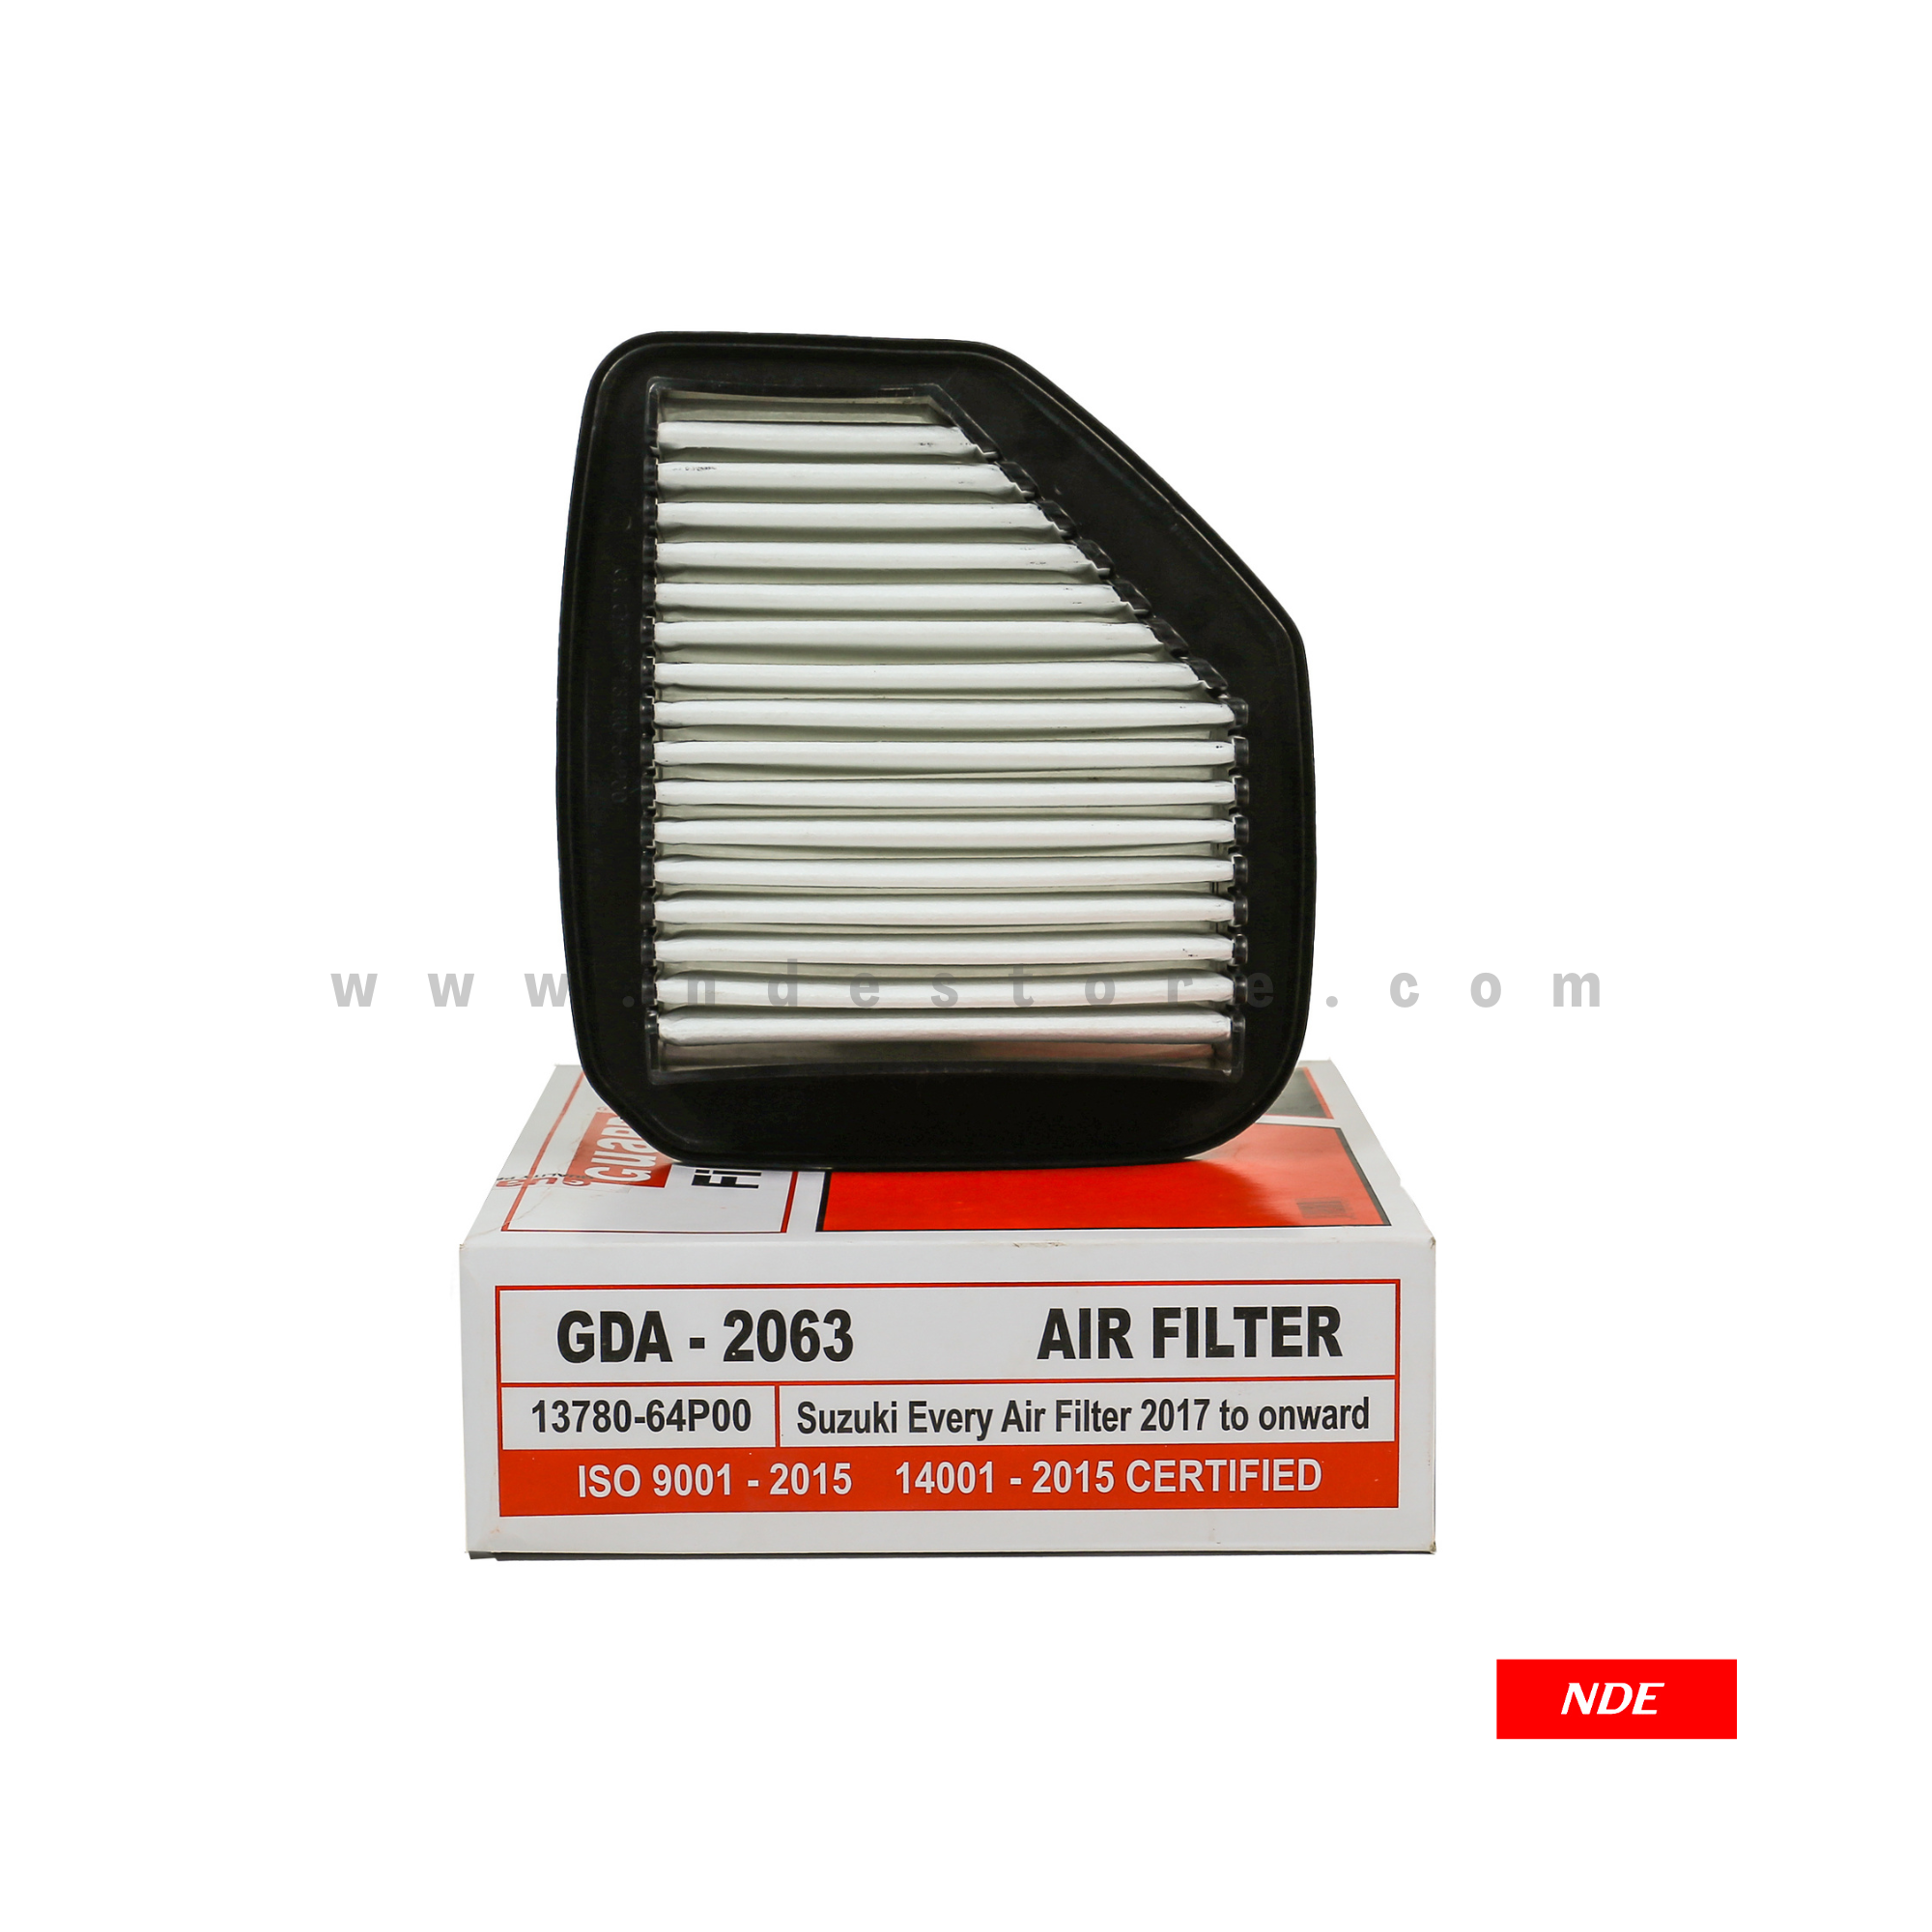 AIR FILTER ELEMENT SUB ASSY GUARD FILTER FOR SUZUKI EVERY (ALL MODELS)